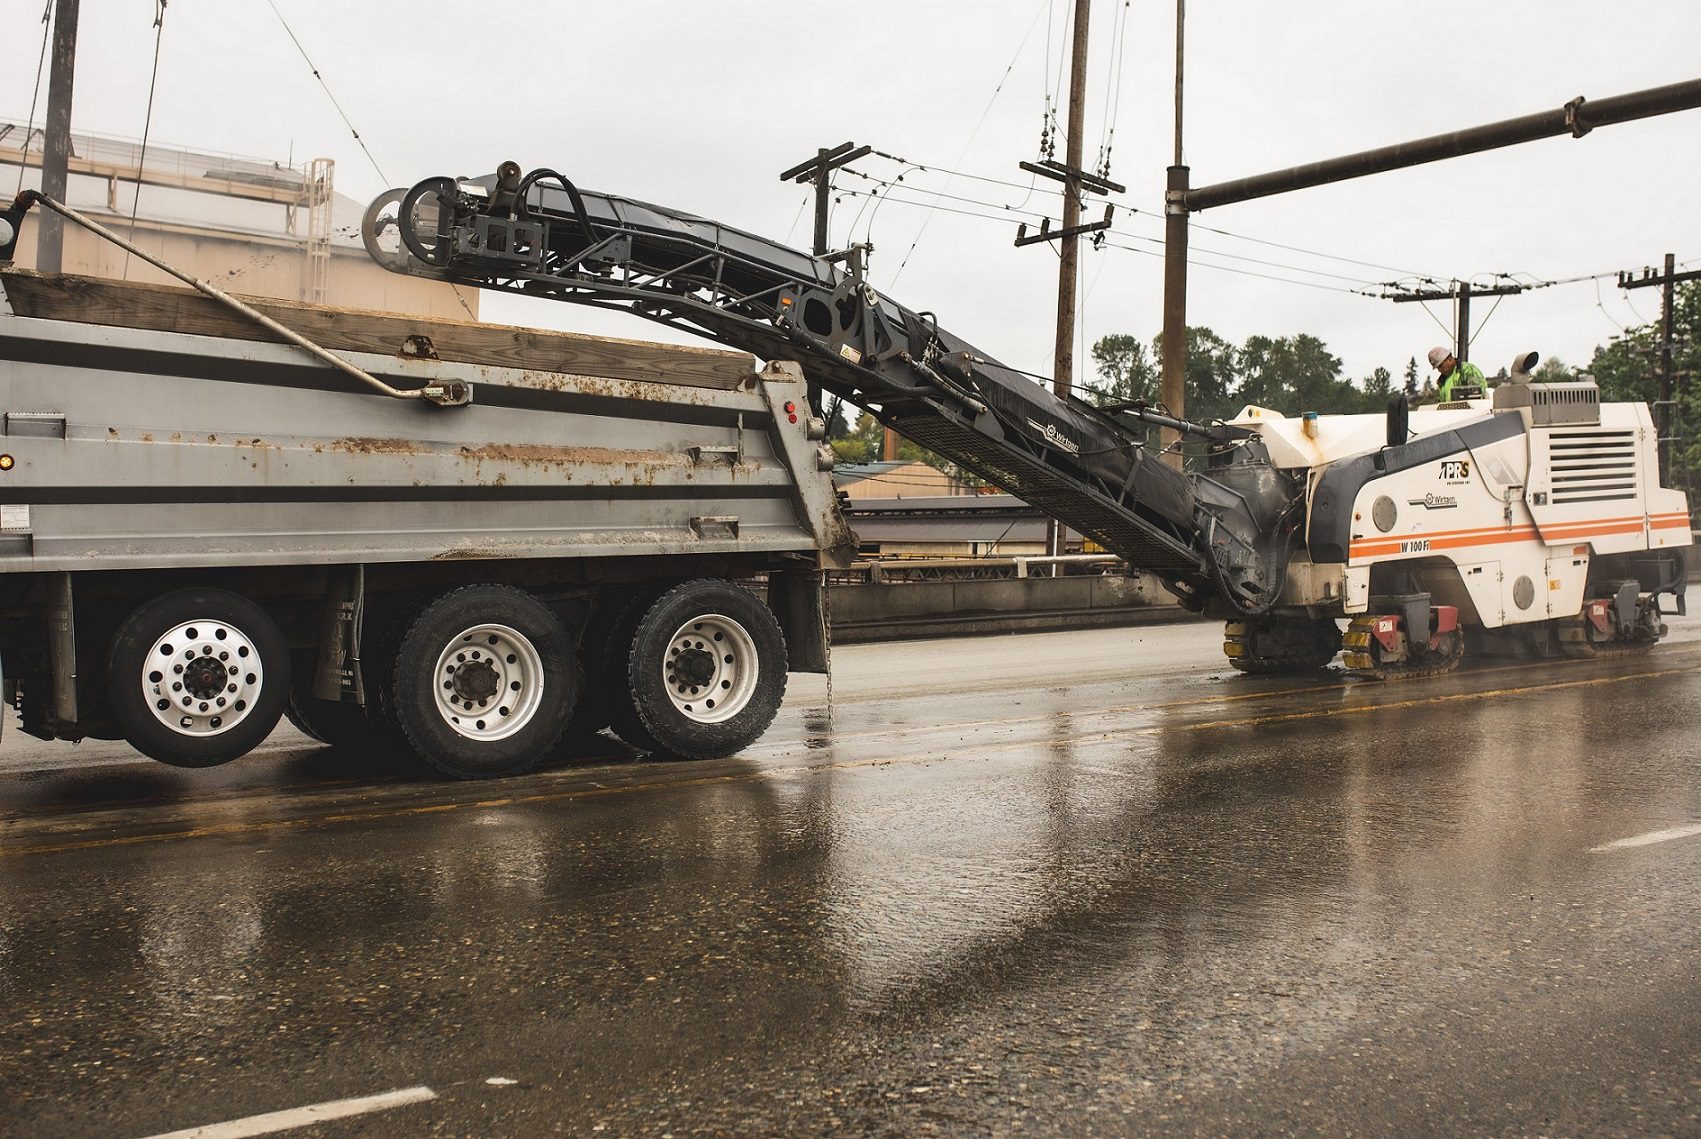 Crews conduct resurfacing along the Fauntleroy Expressway. Heavy equipment is pictured, including a large truck, on a wet and cloudy day.